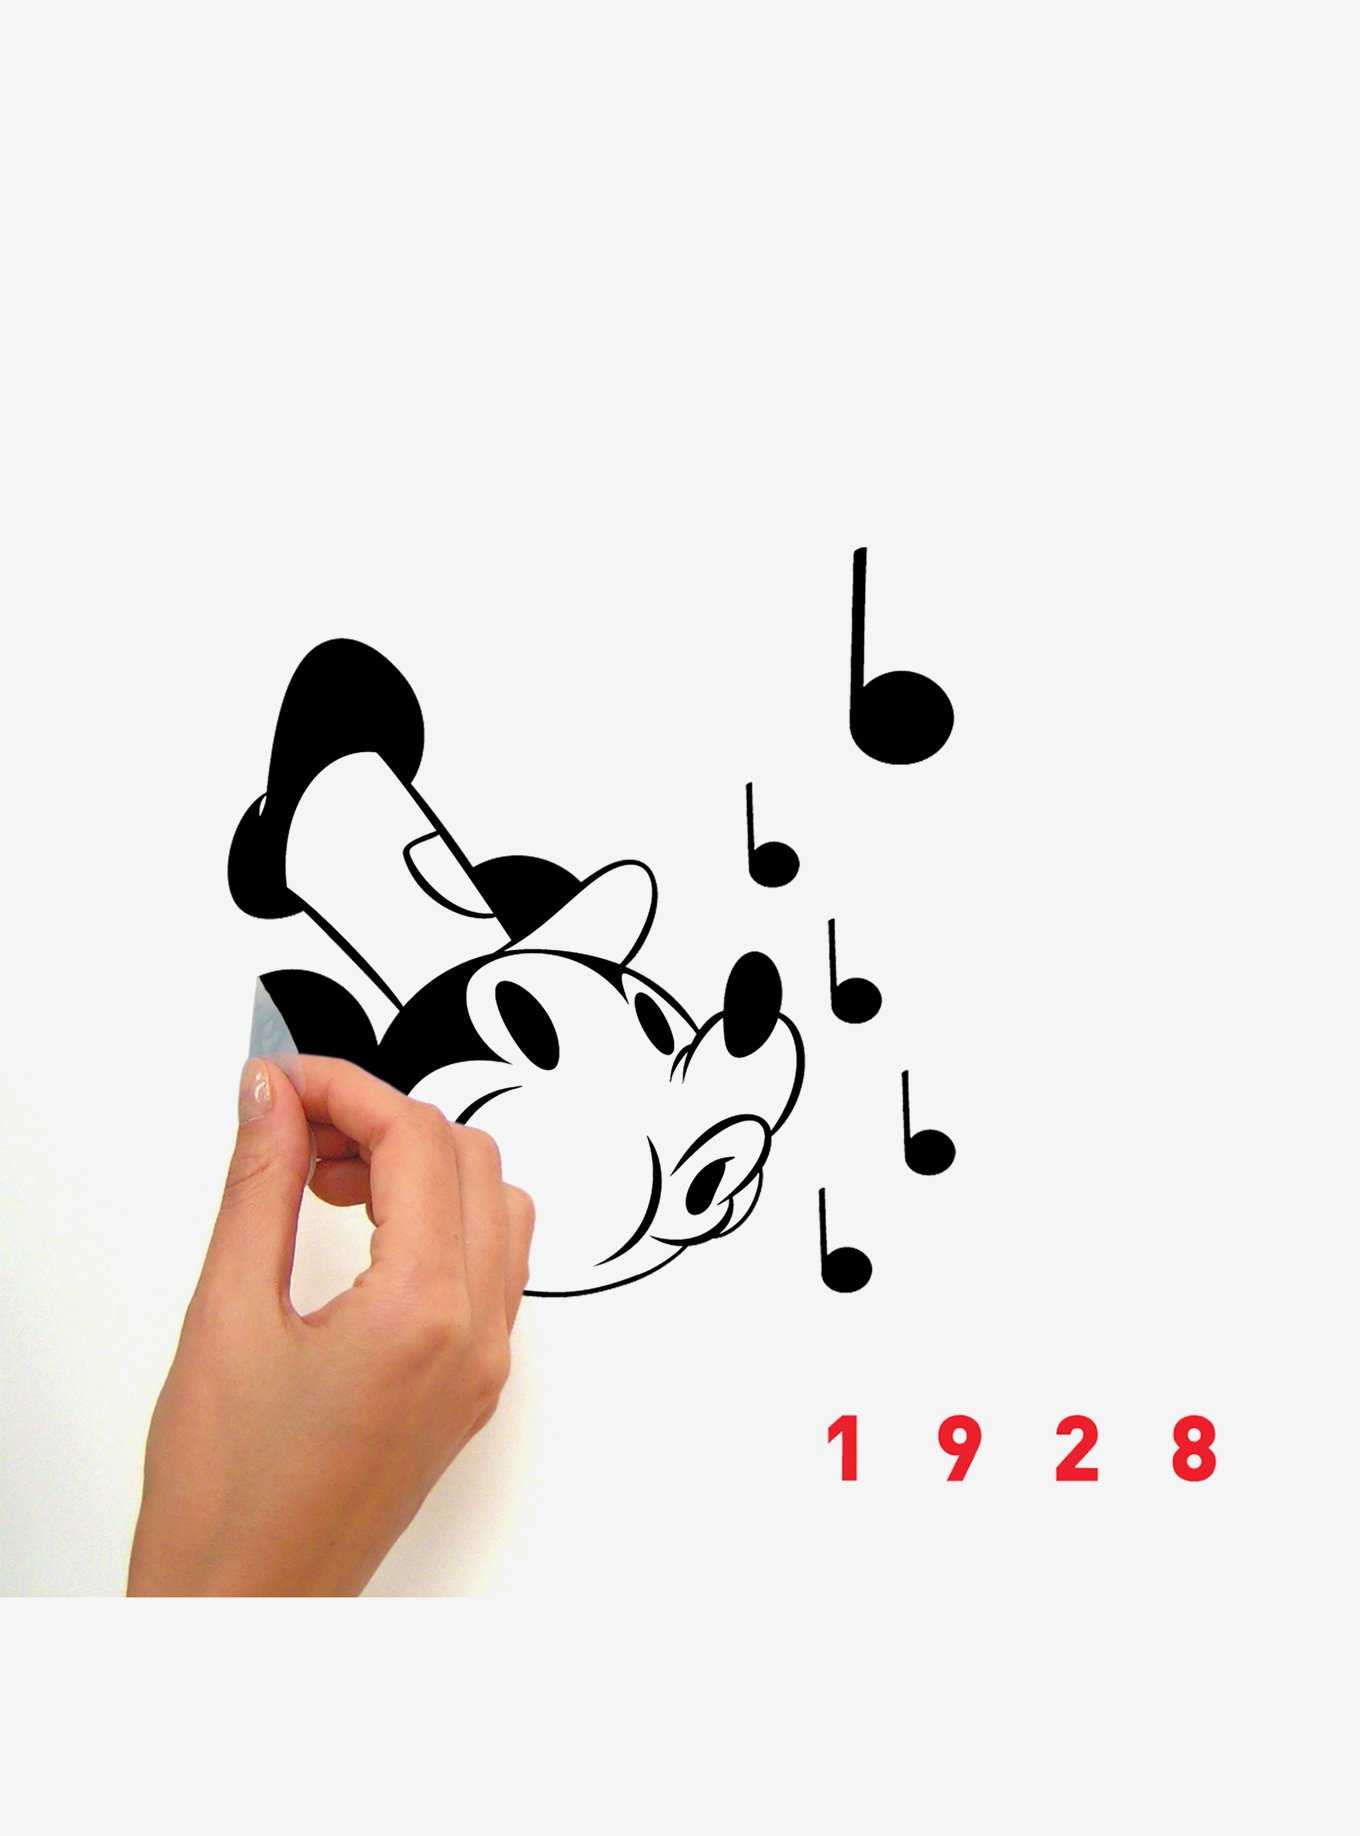 Disney Mickey Mouse Classic 90Th Anniversary Peel And Stick Wall Decals, , hi-res